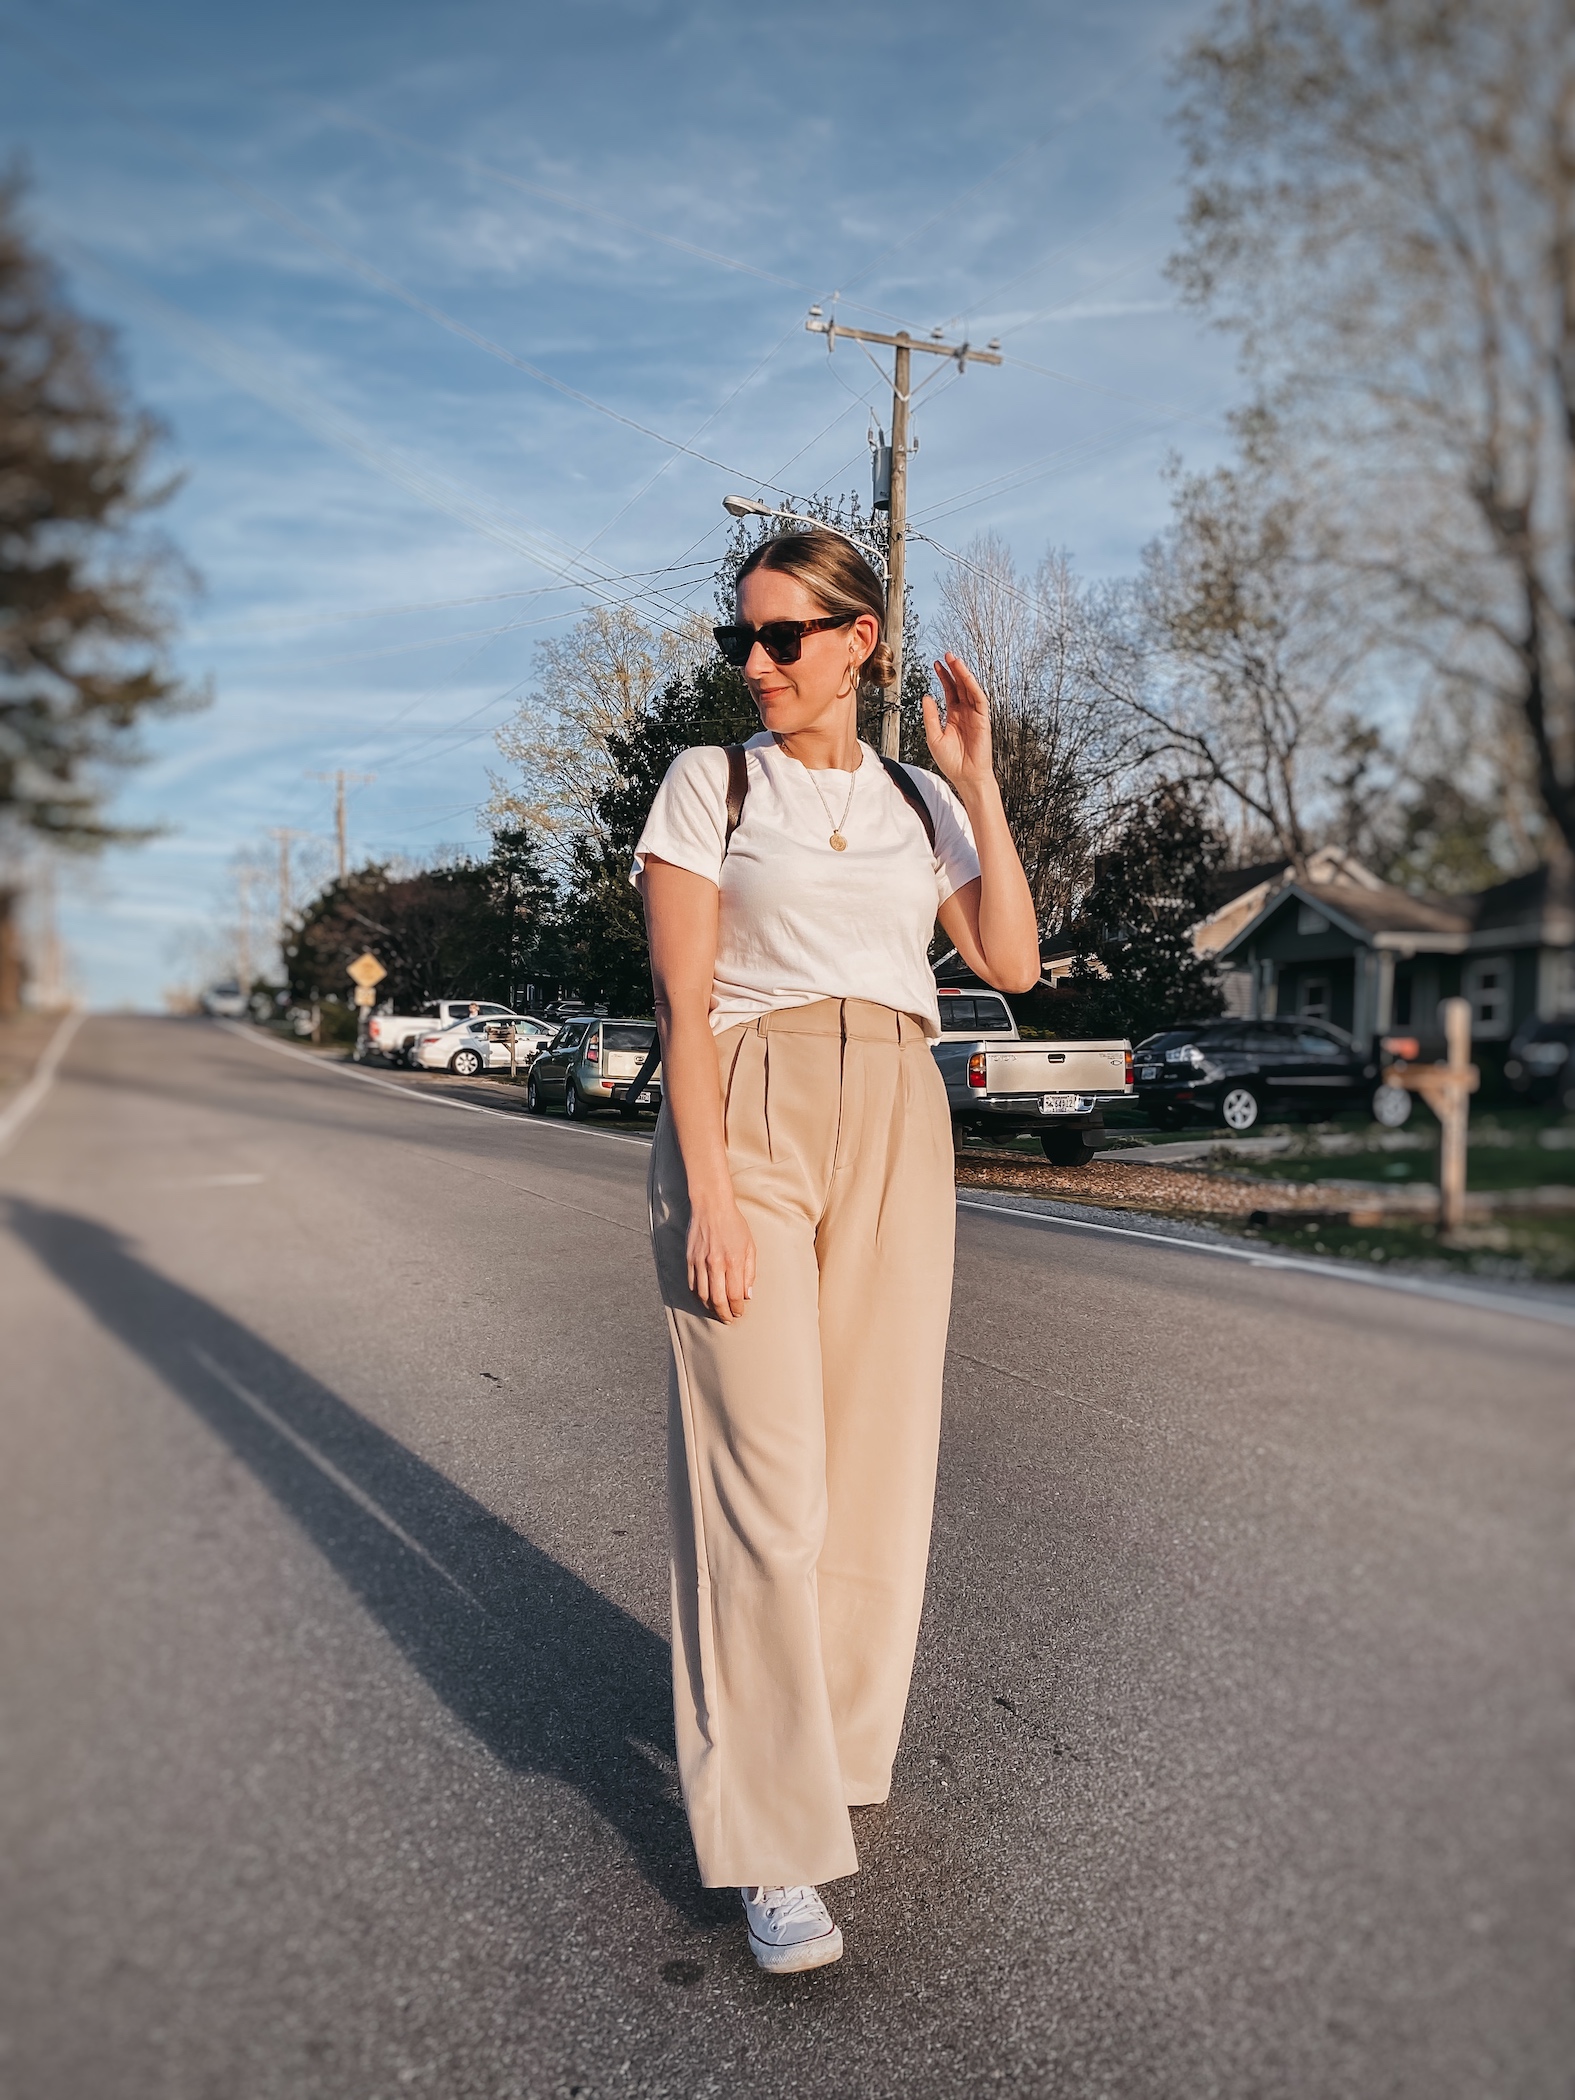 10 High Waisted Pants Outfit Looks That Are Super Trendy  High waisted  wide leg pants, High waisted pants outfit, Wide leg trousers